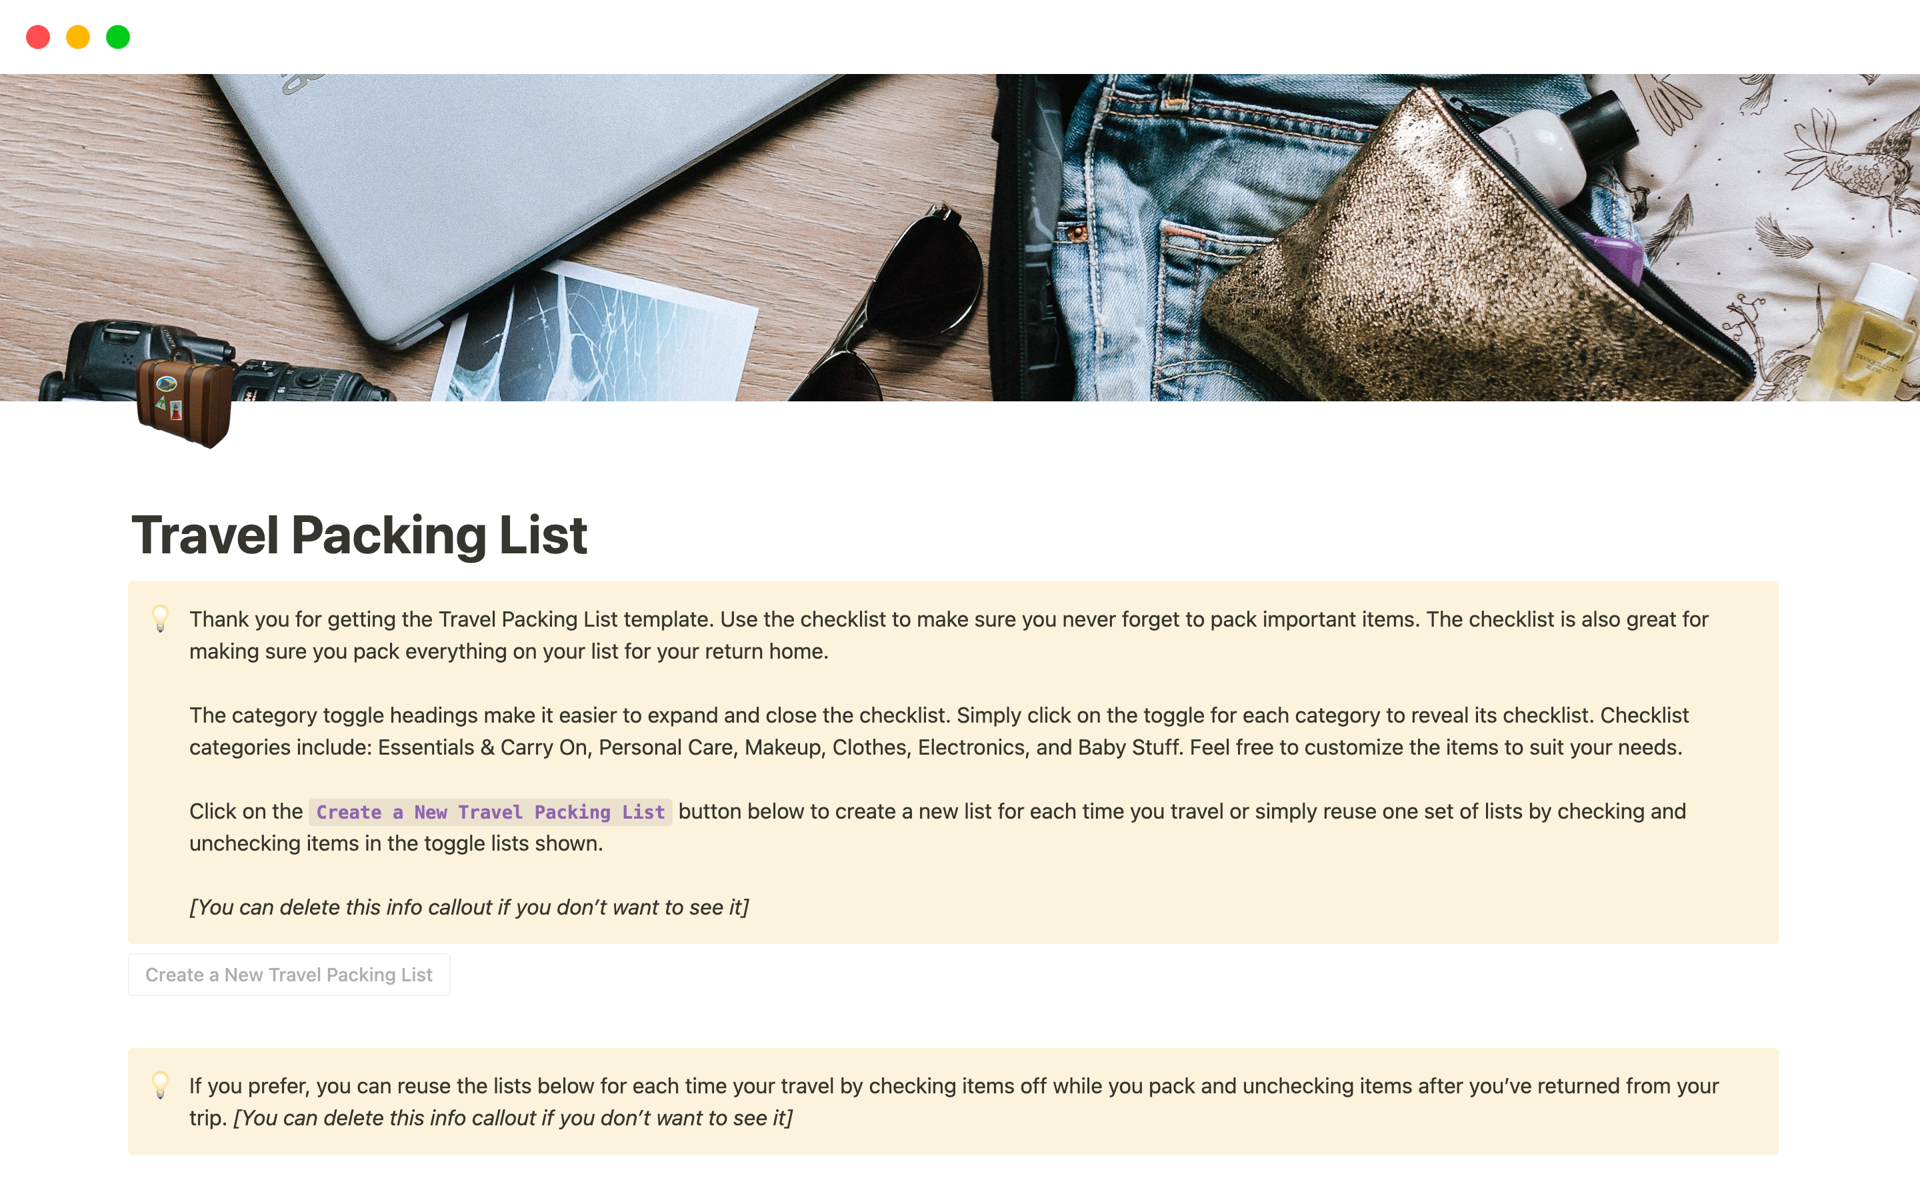 The Travel Packing List is a simple Notion template checklist, optimized for both mobile and desktop, to make sure you never forget to pack important items for your trips to remind you to pack everything on your list for your return home.